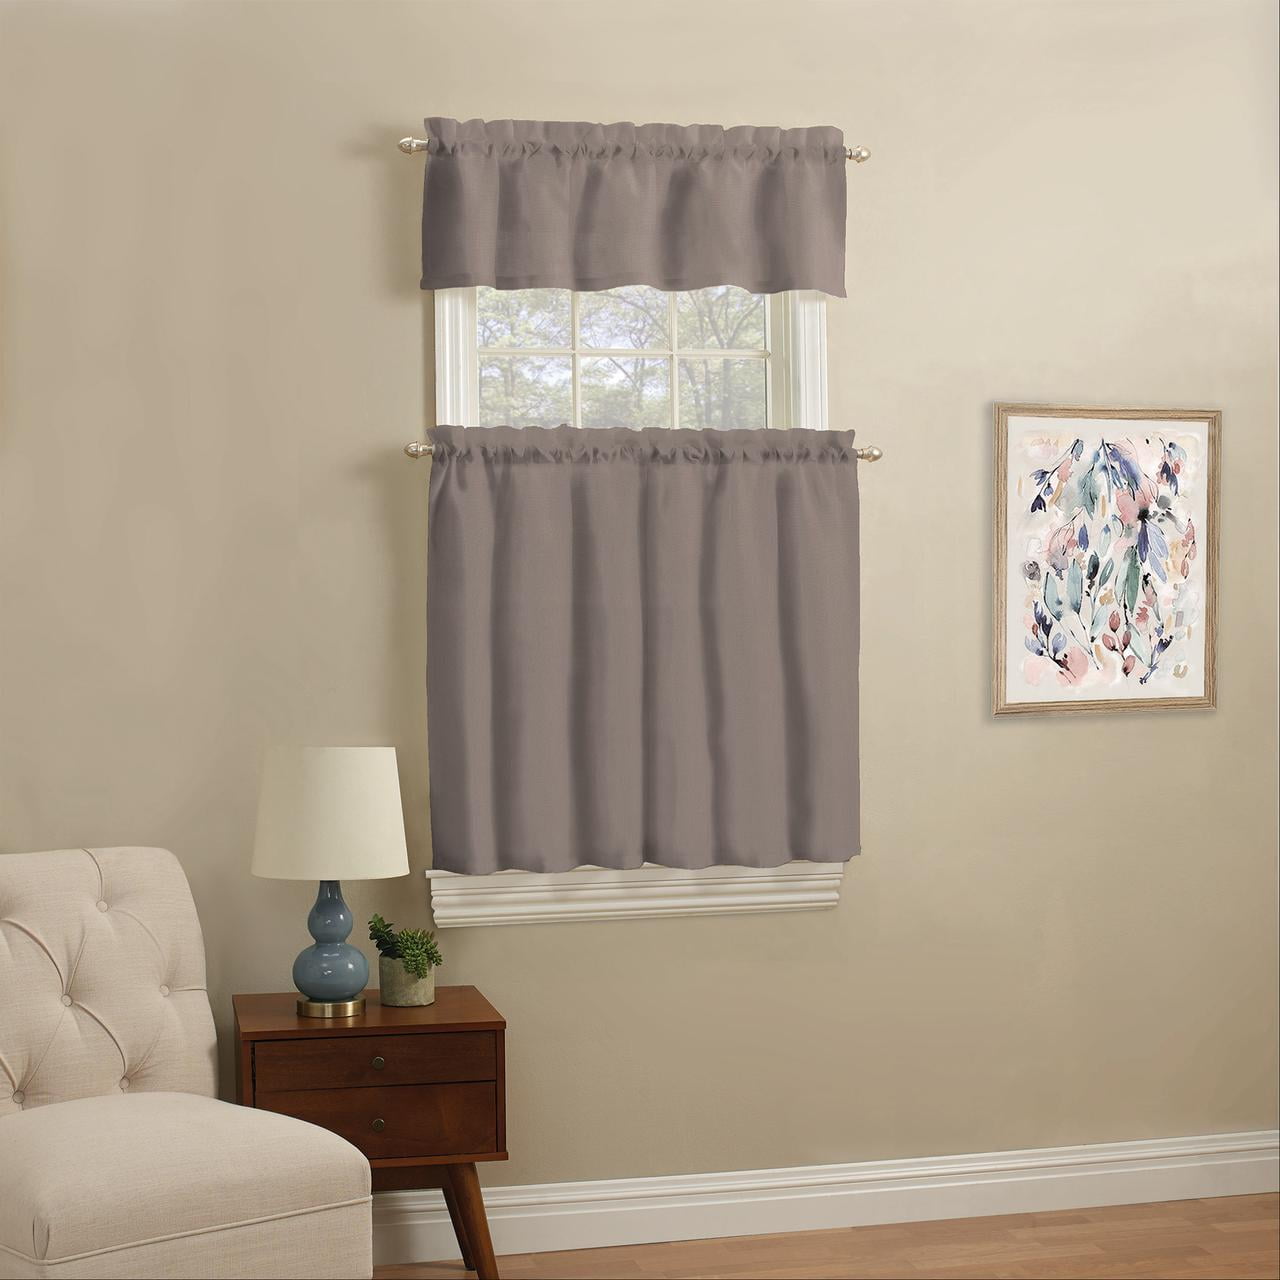 Modern Classic Taupe 3 Piece Kitchen Curtains Set Valance & Tiers Cafe Curtains 